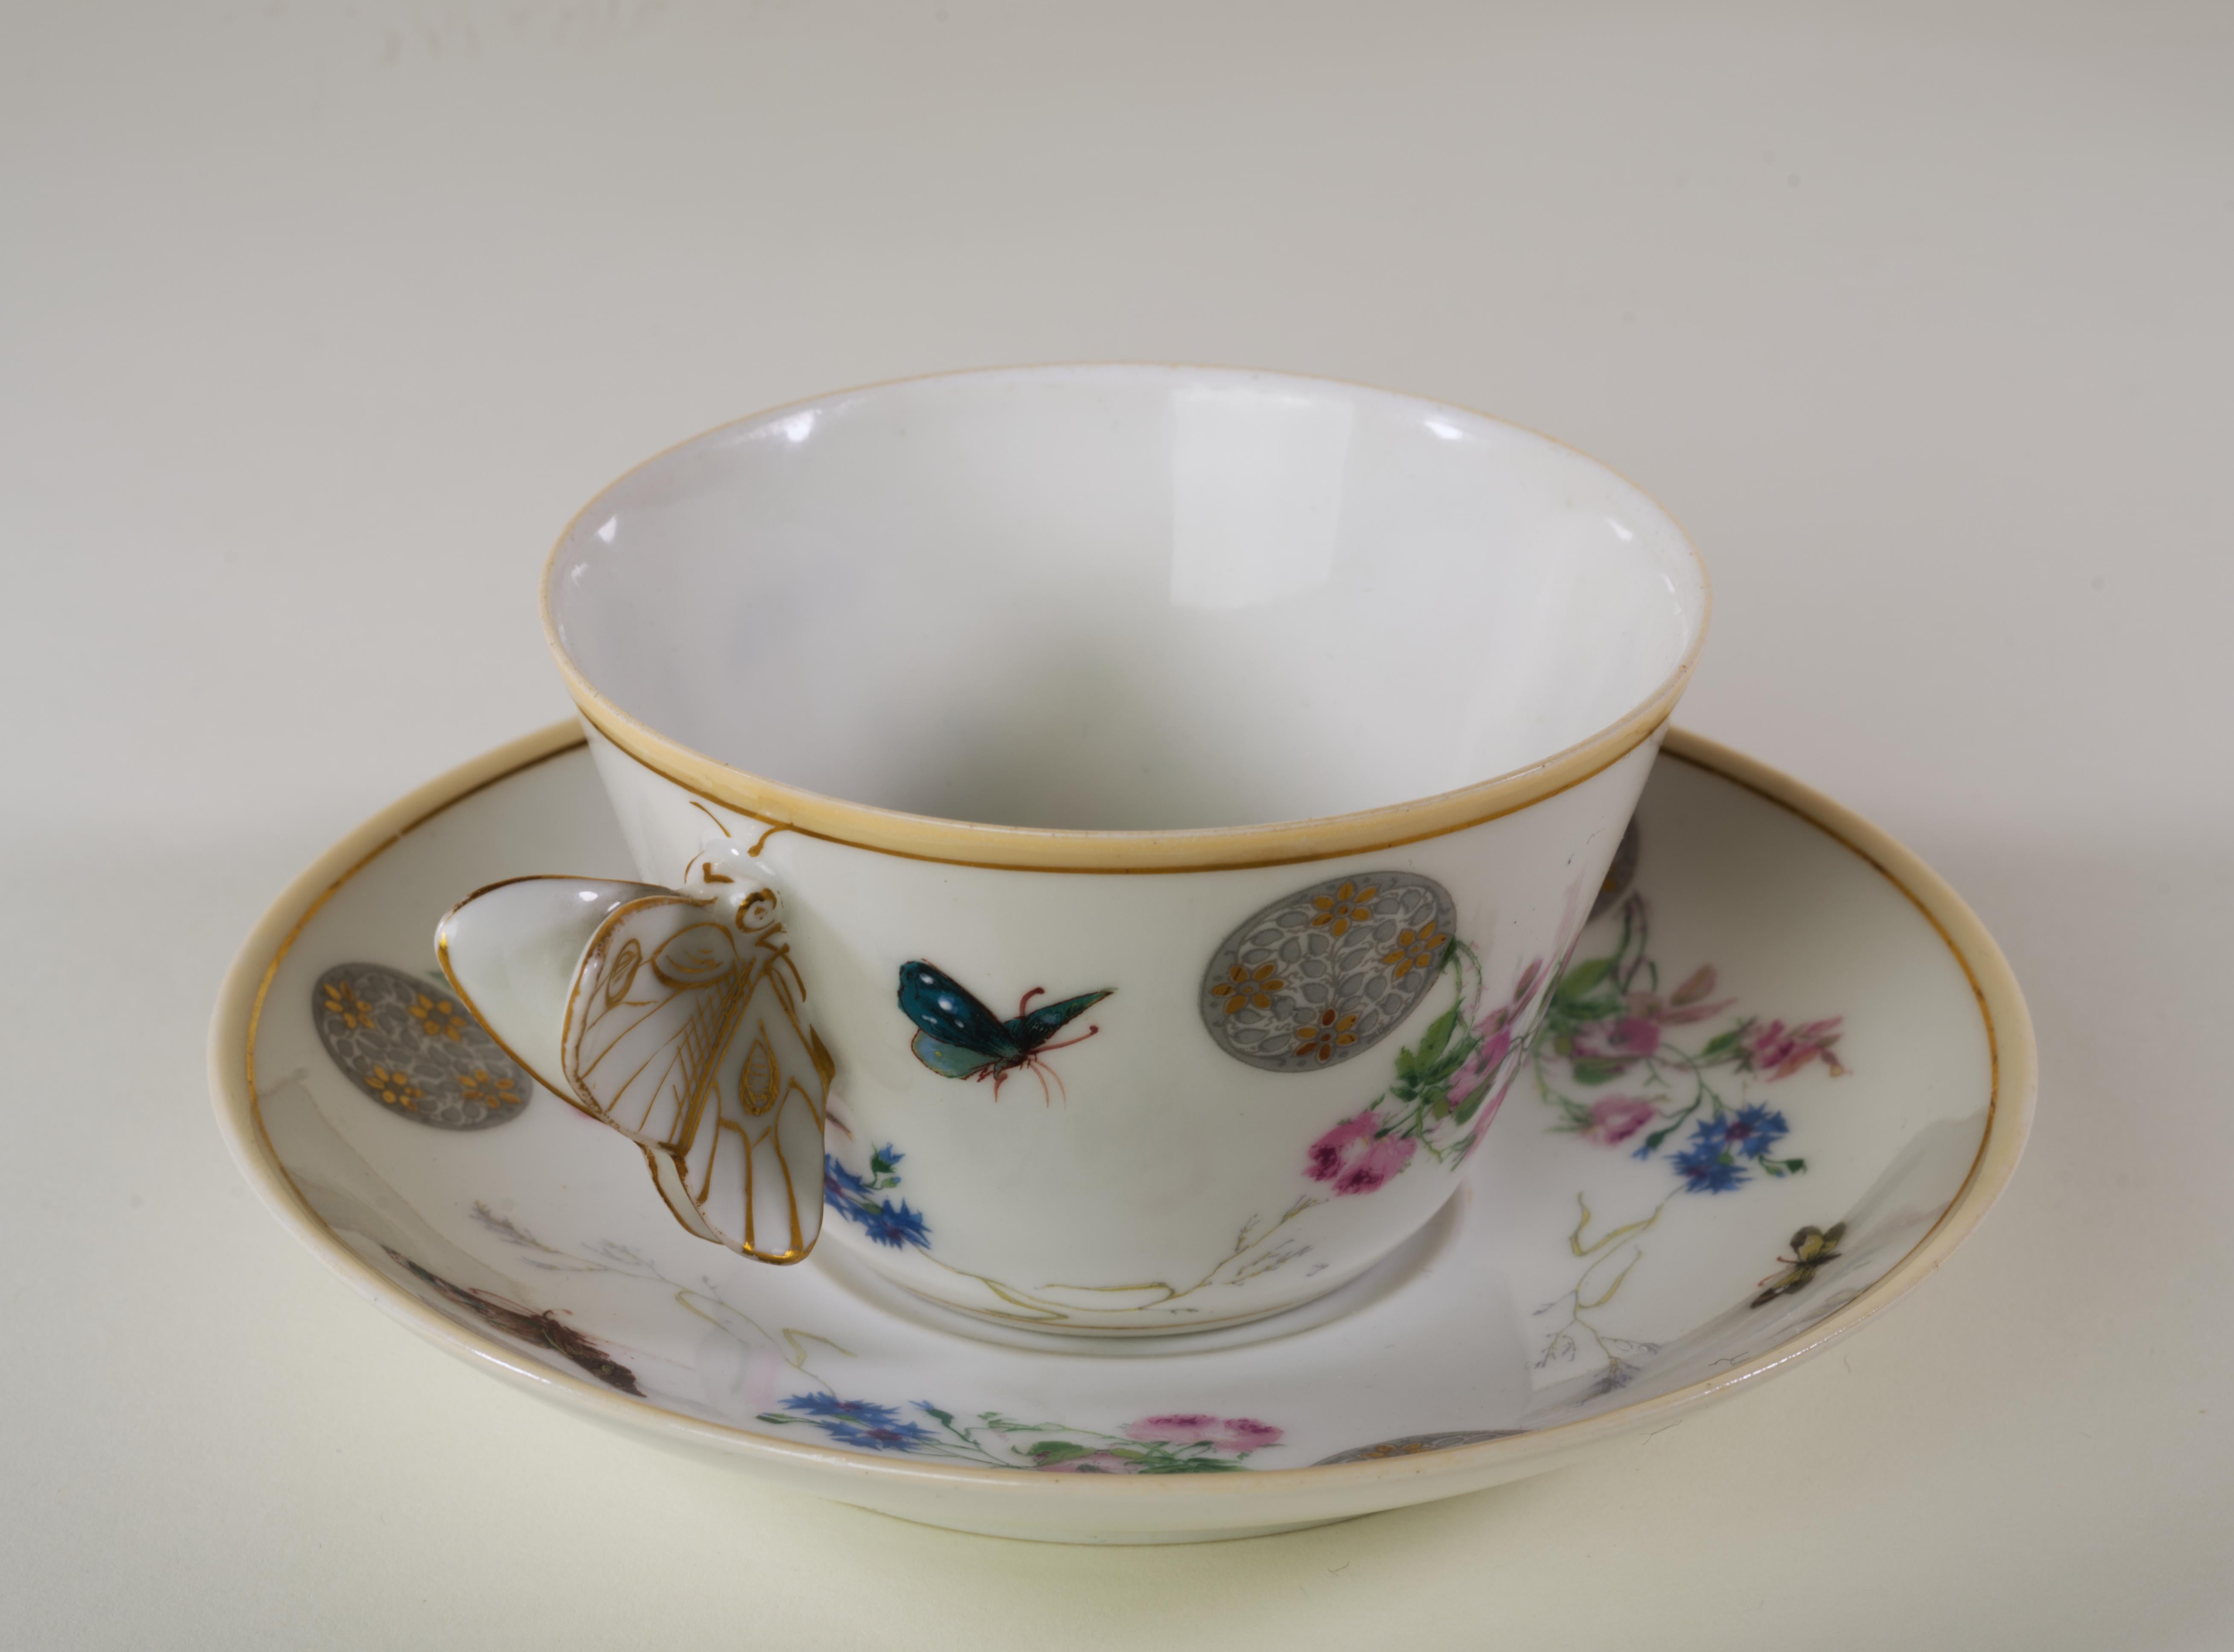 French Haviland Limoges Butterfly Handled Cup and saucer set, 1879-1889, Aesthetic  For Sale